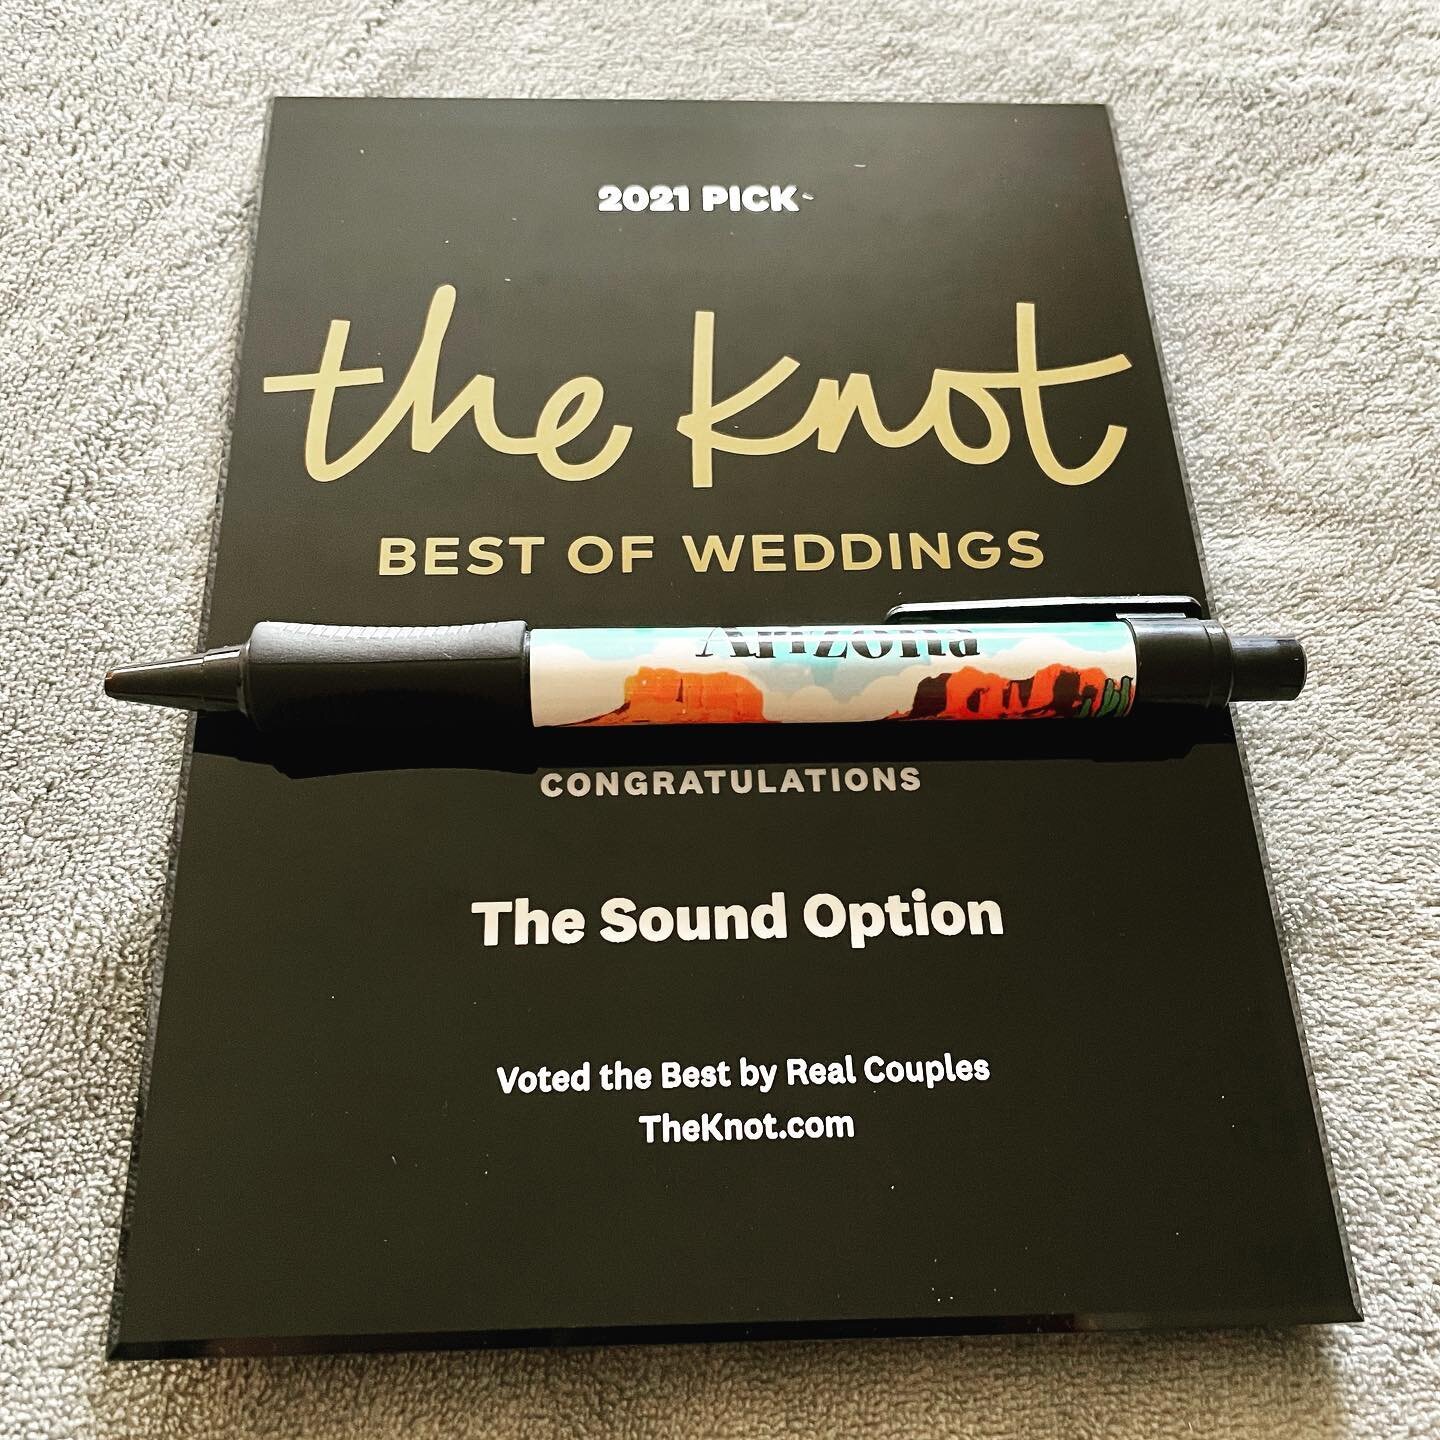 Thank you again to all the couples who made this possible! And shout out to my lucky pen - don&rsquo;t ever run out of ink!

#weddingdj 
#dj 
#djlife 
#theknot 
#columbuswedding 
#thankful